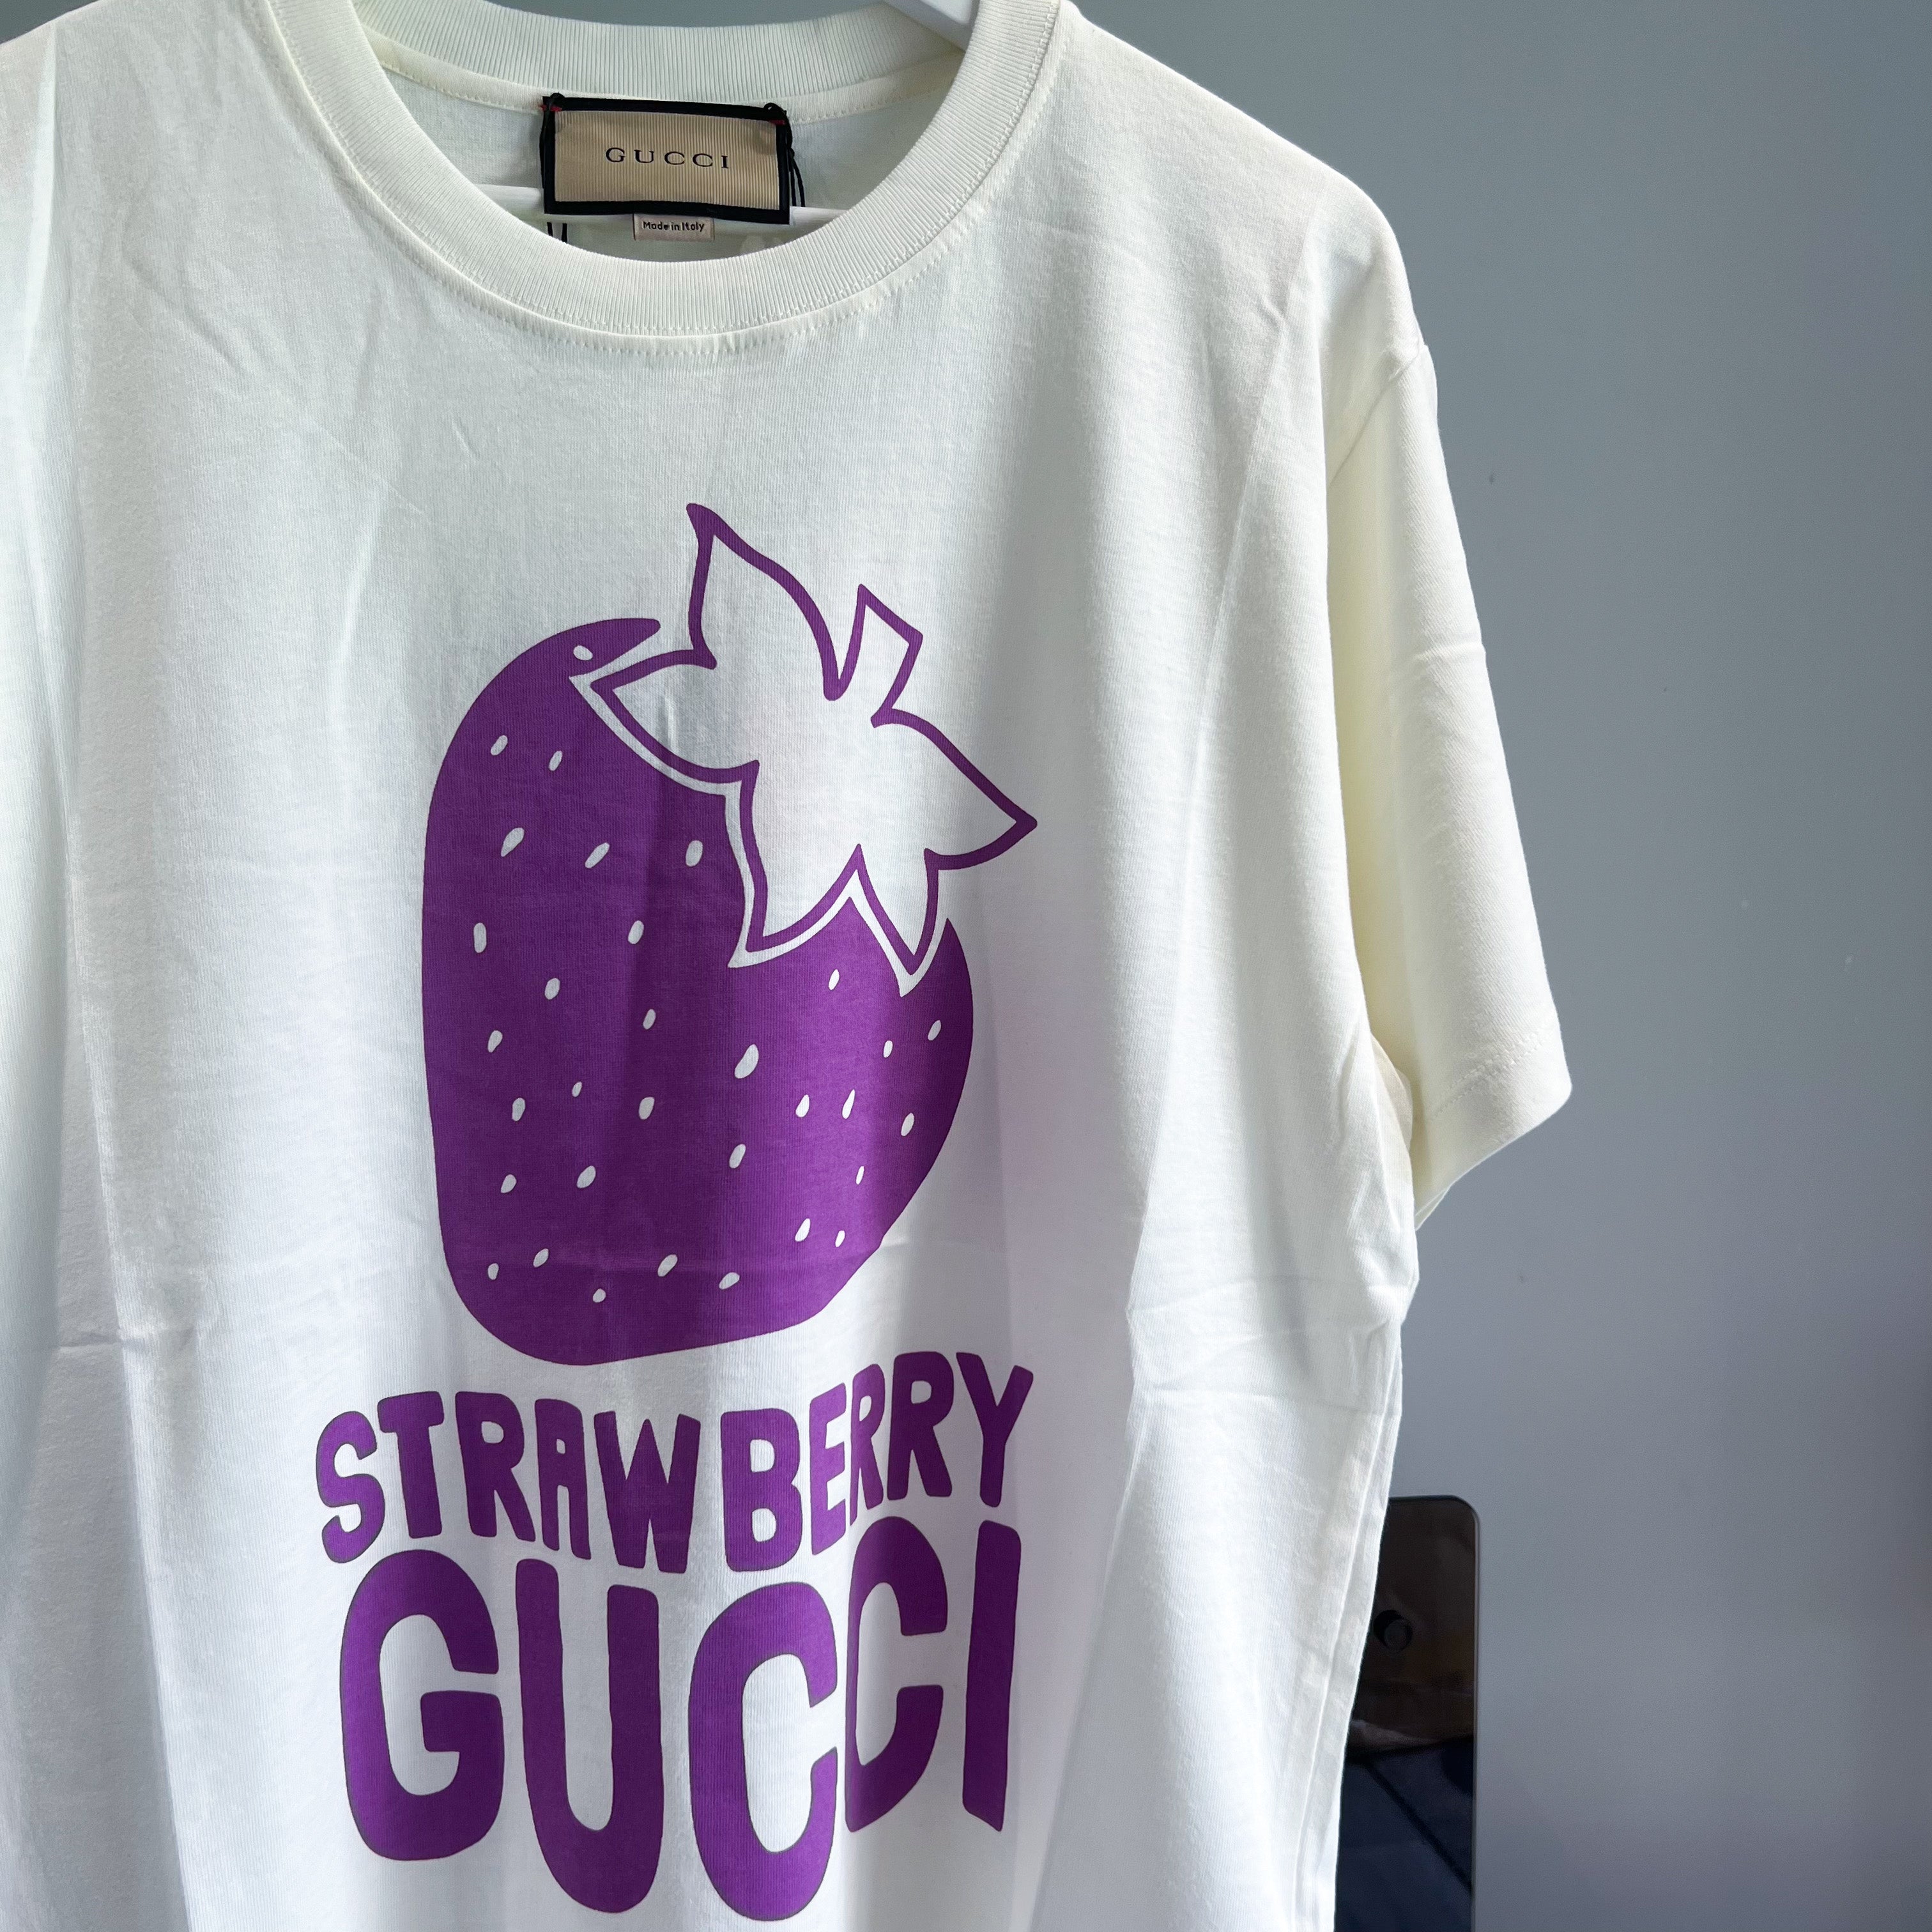 Gucci Strawberry Tee - Ivory